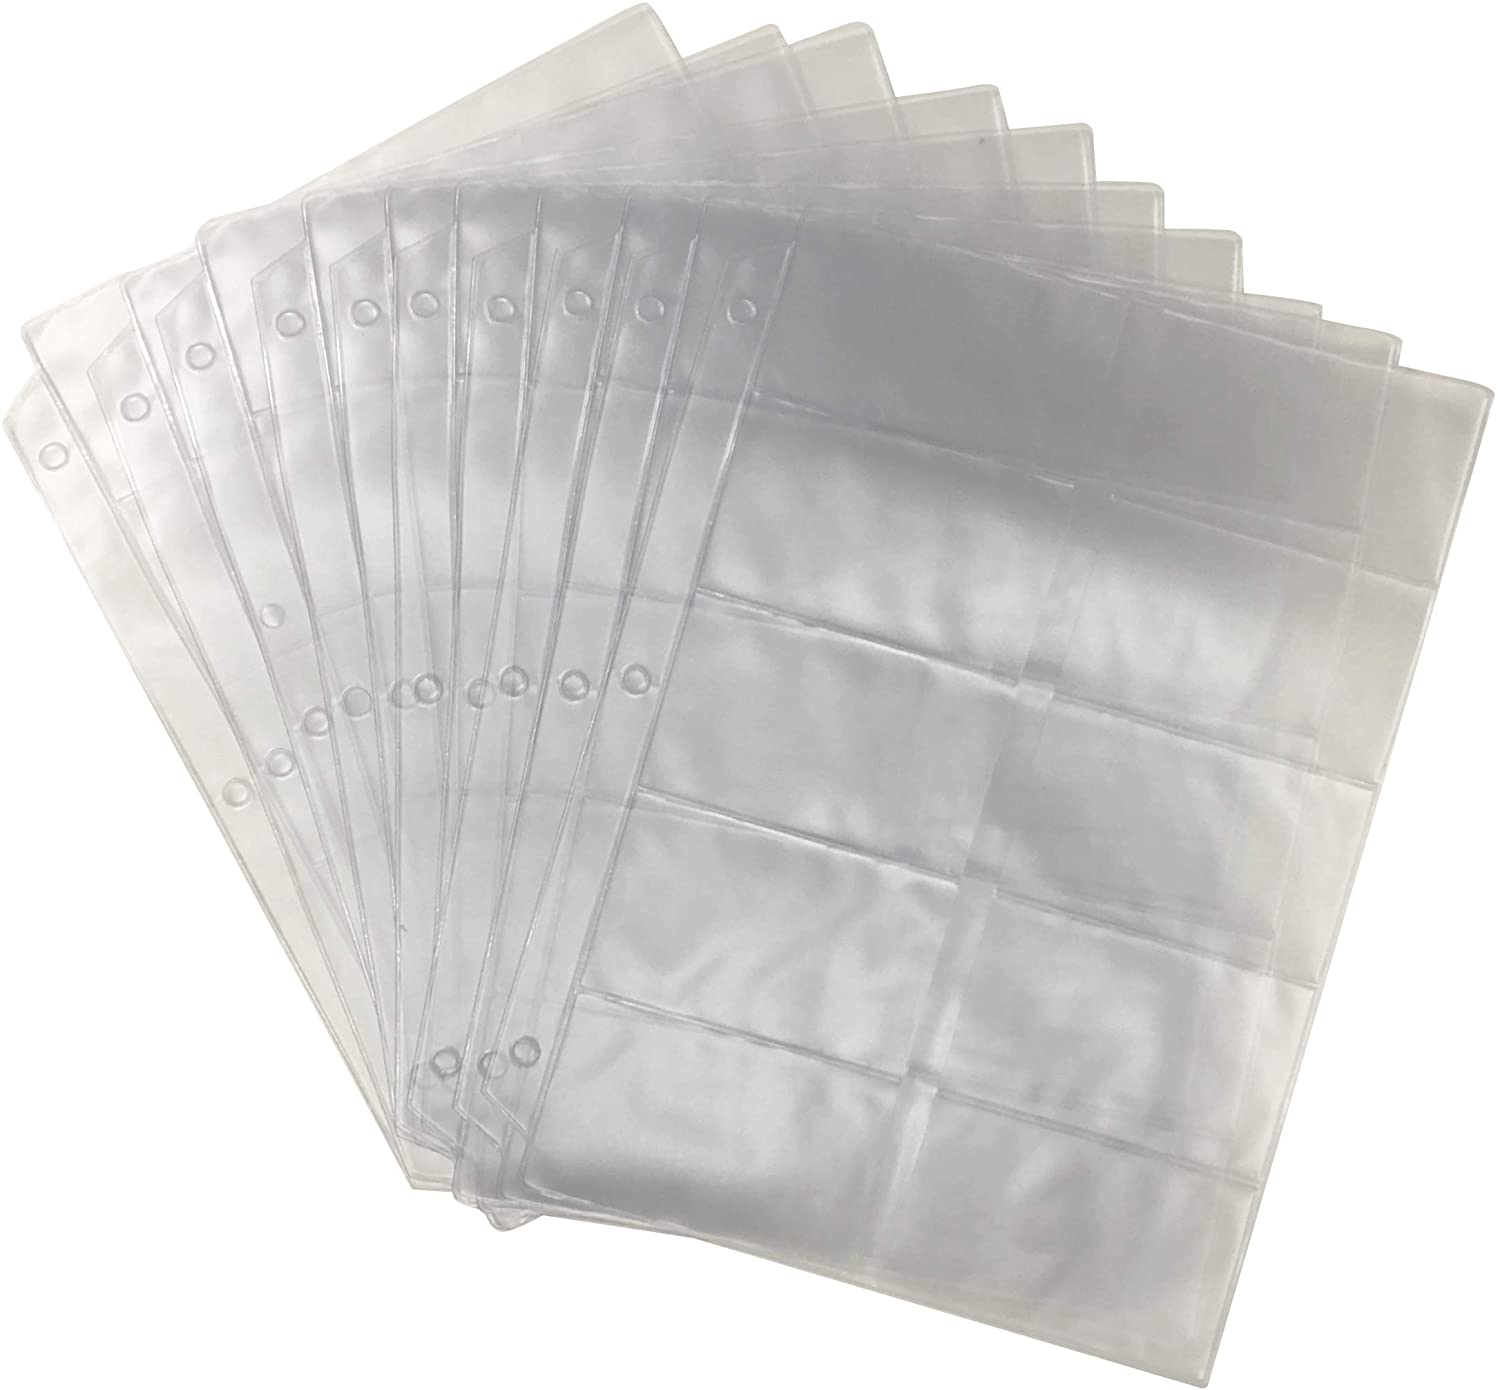 Business Card Sleeves for 3 Ring Binders, Plastic Card Holder